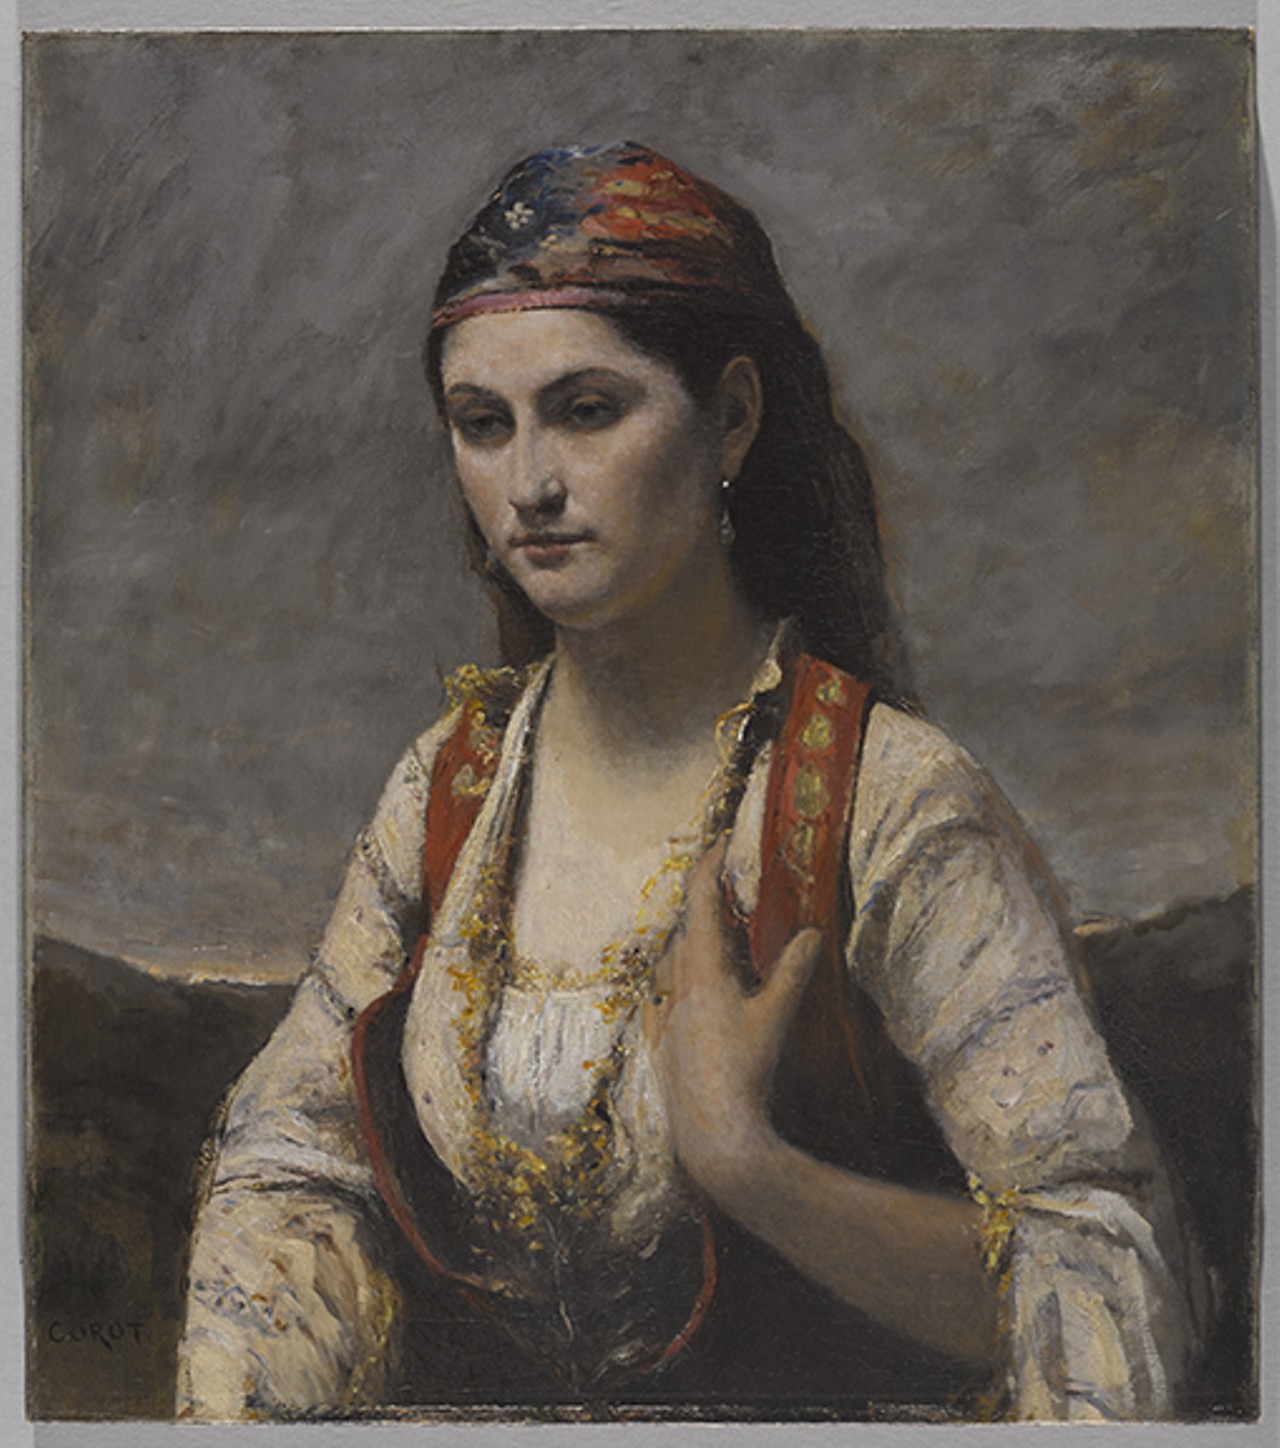 Jean-Baptiste-Camille Corot (French, 1796&#150;1875). The Young Woman of Albano, 1872. Oil on canvas, 29 3/16 x 25 13/16 in. (74.1 x 65.6 cm). Brooklyn Museum, Gift of Mrs. Horace O. Havemeyer, 42.196. (Photo: Sarah DeSantis, Brooklyn Museum)